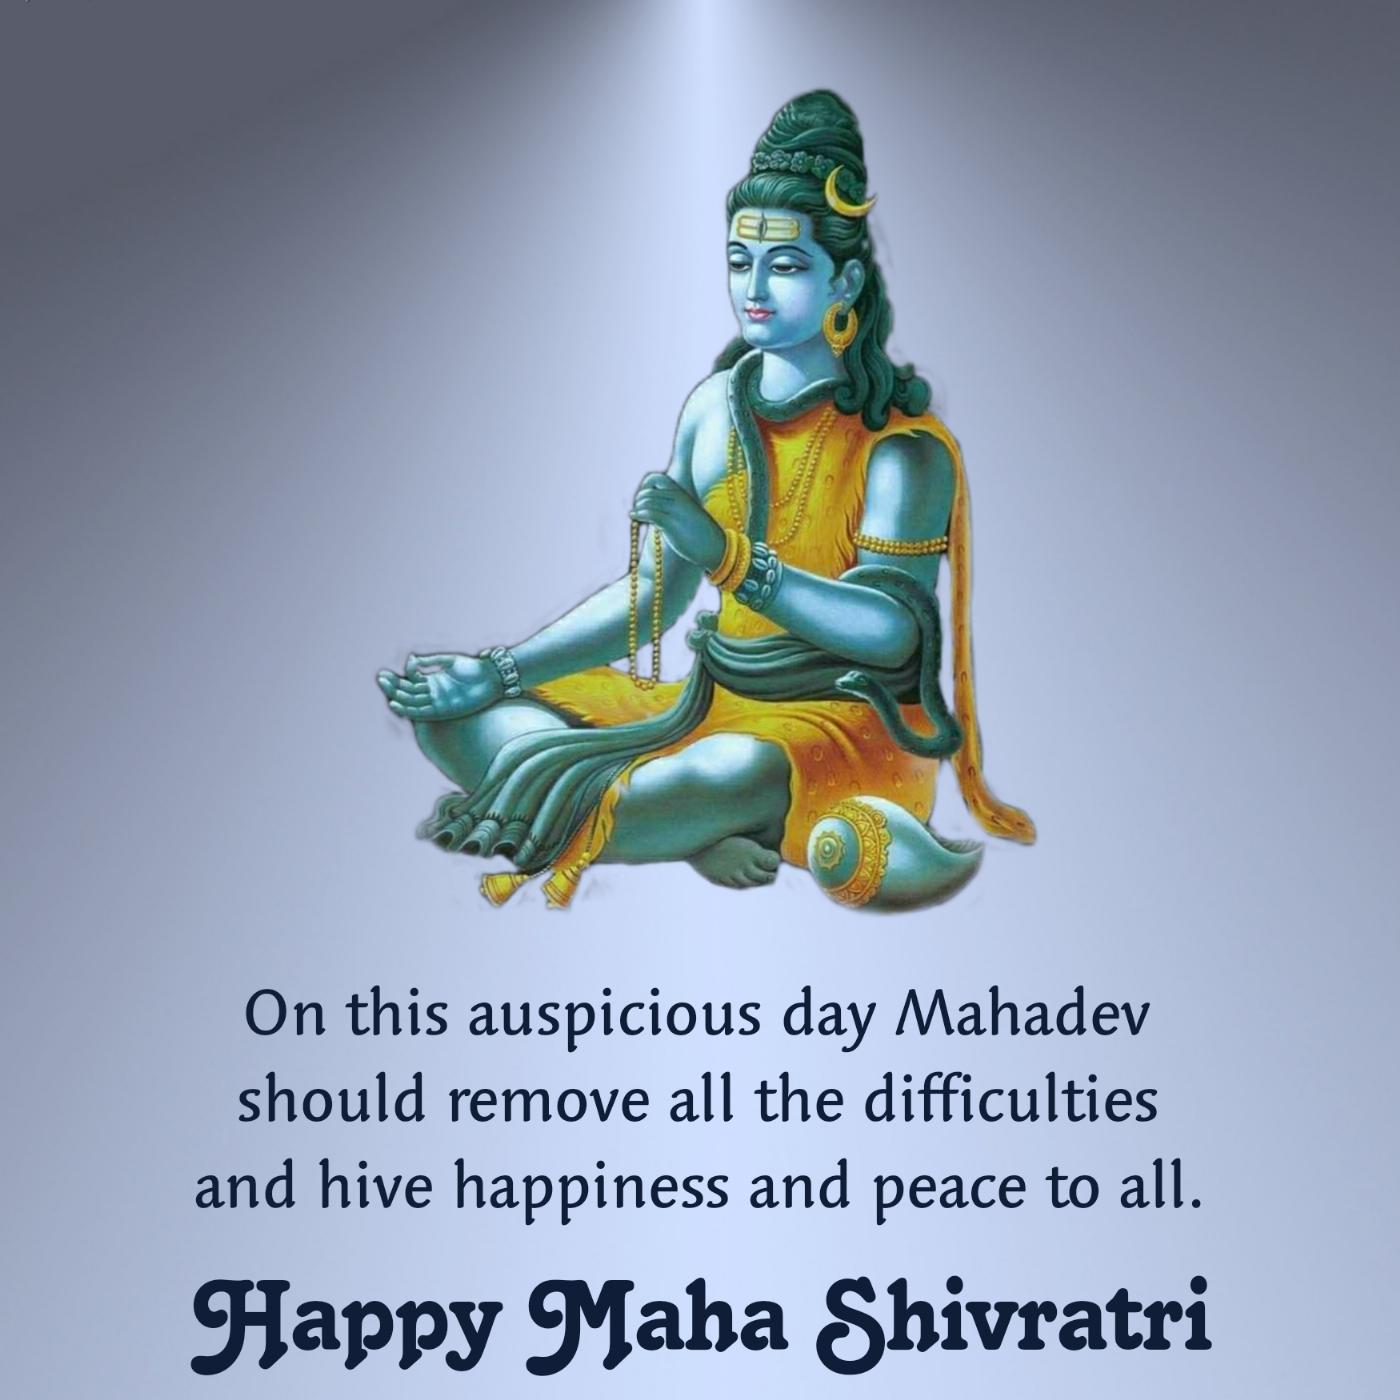 On this auspicious day Mahadev should remove all the difficulties